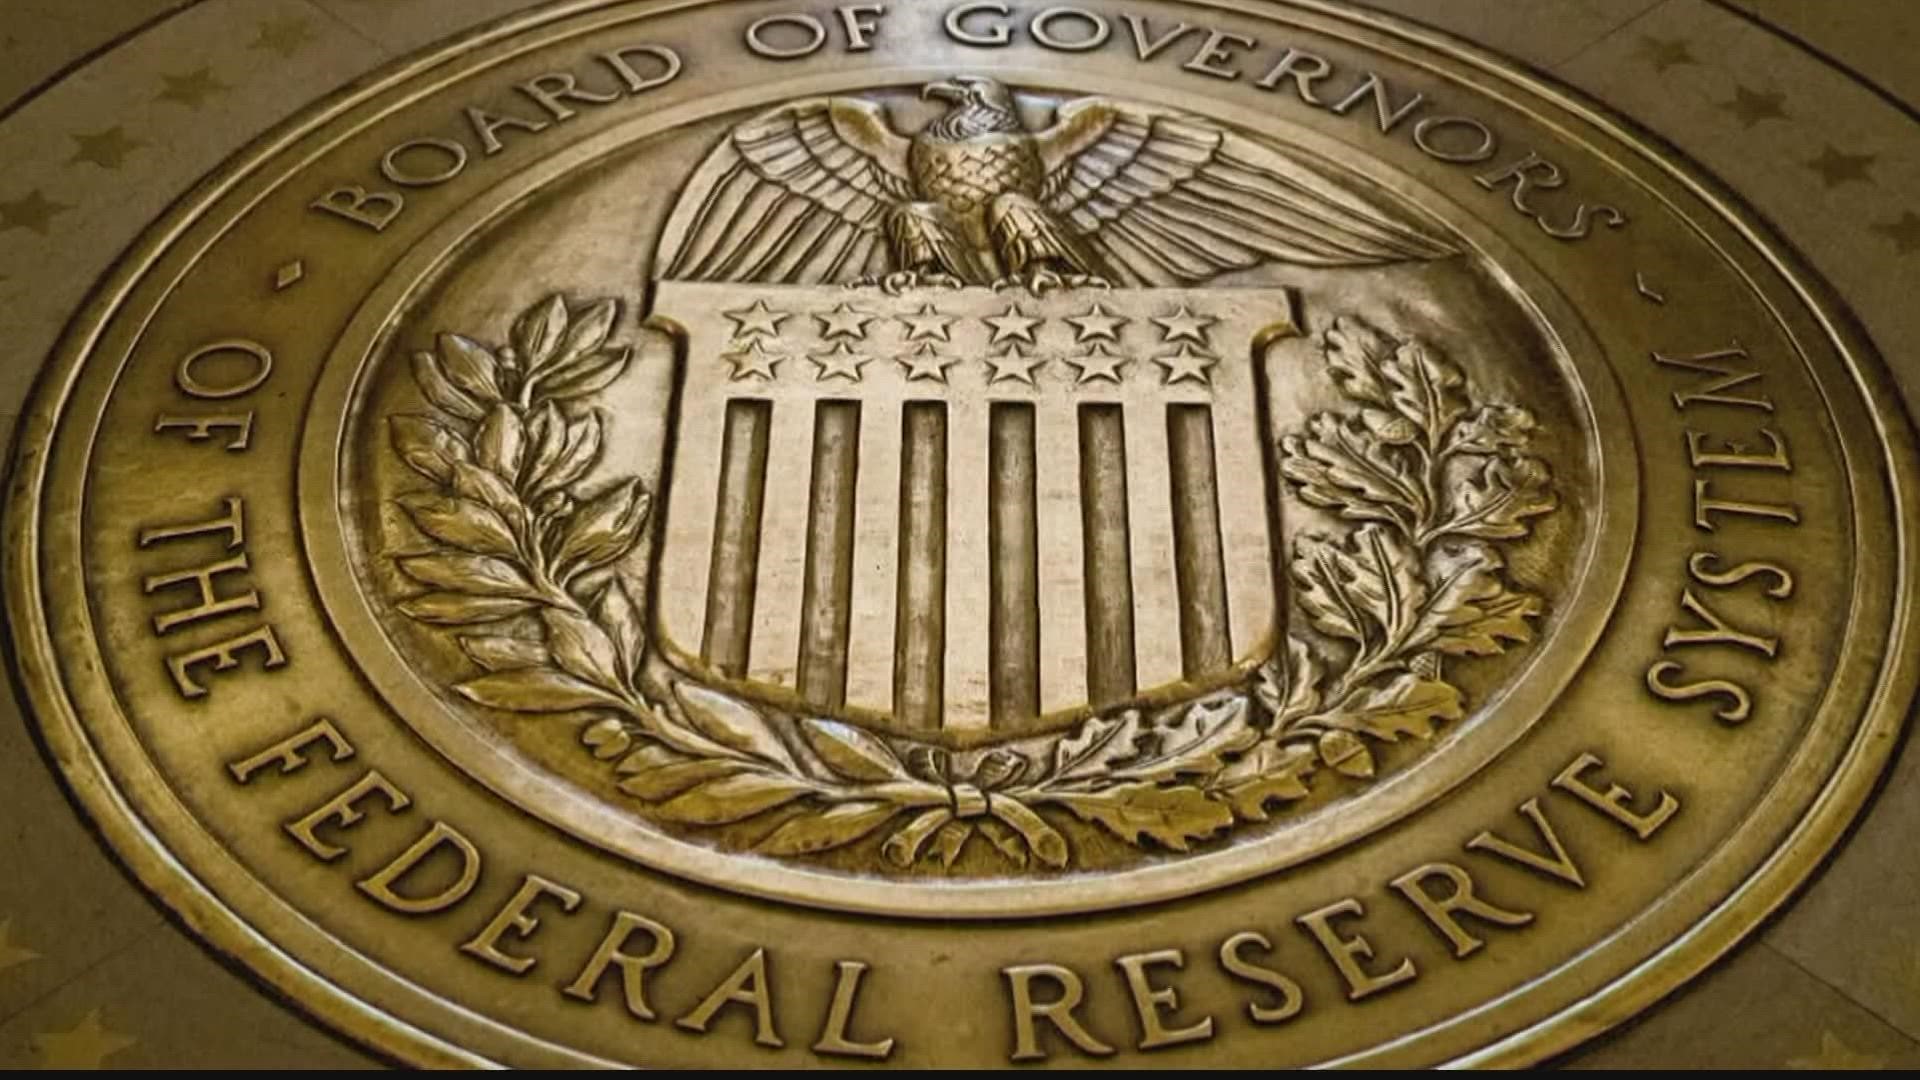 The interest rate on your credit card or bank loan may be going up as the Federal Reserve meets to discuss what they can do about inflation.